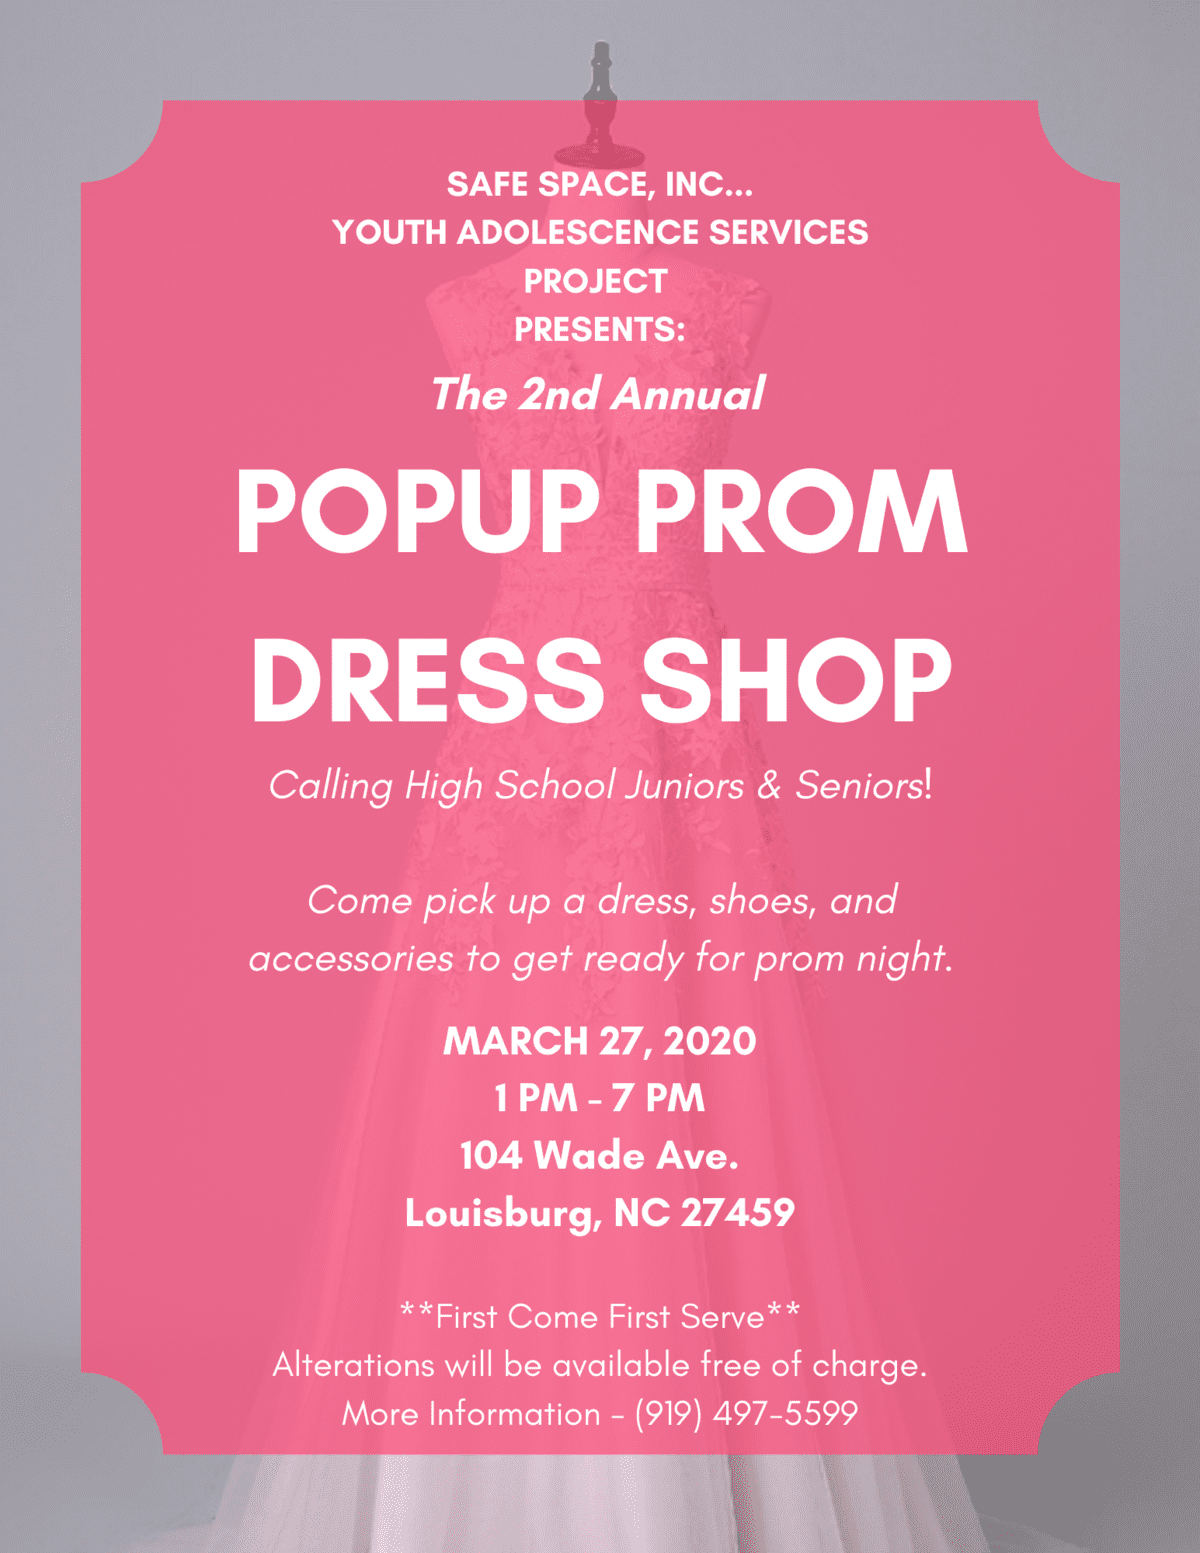 Free prom dresses and accessories at Prom Dress PopUp Shop in Louisburg ...